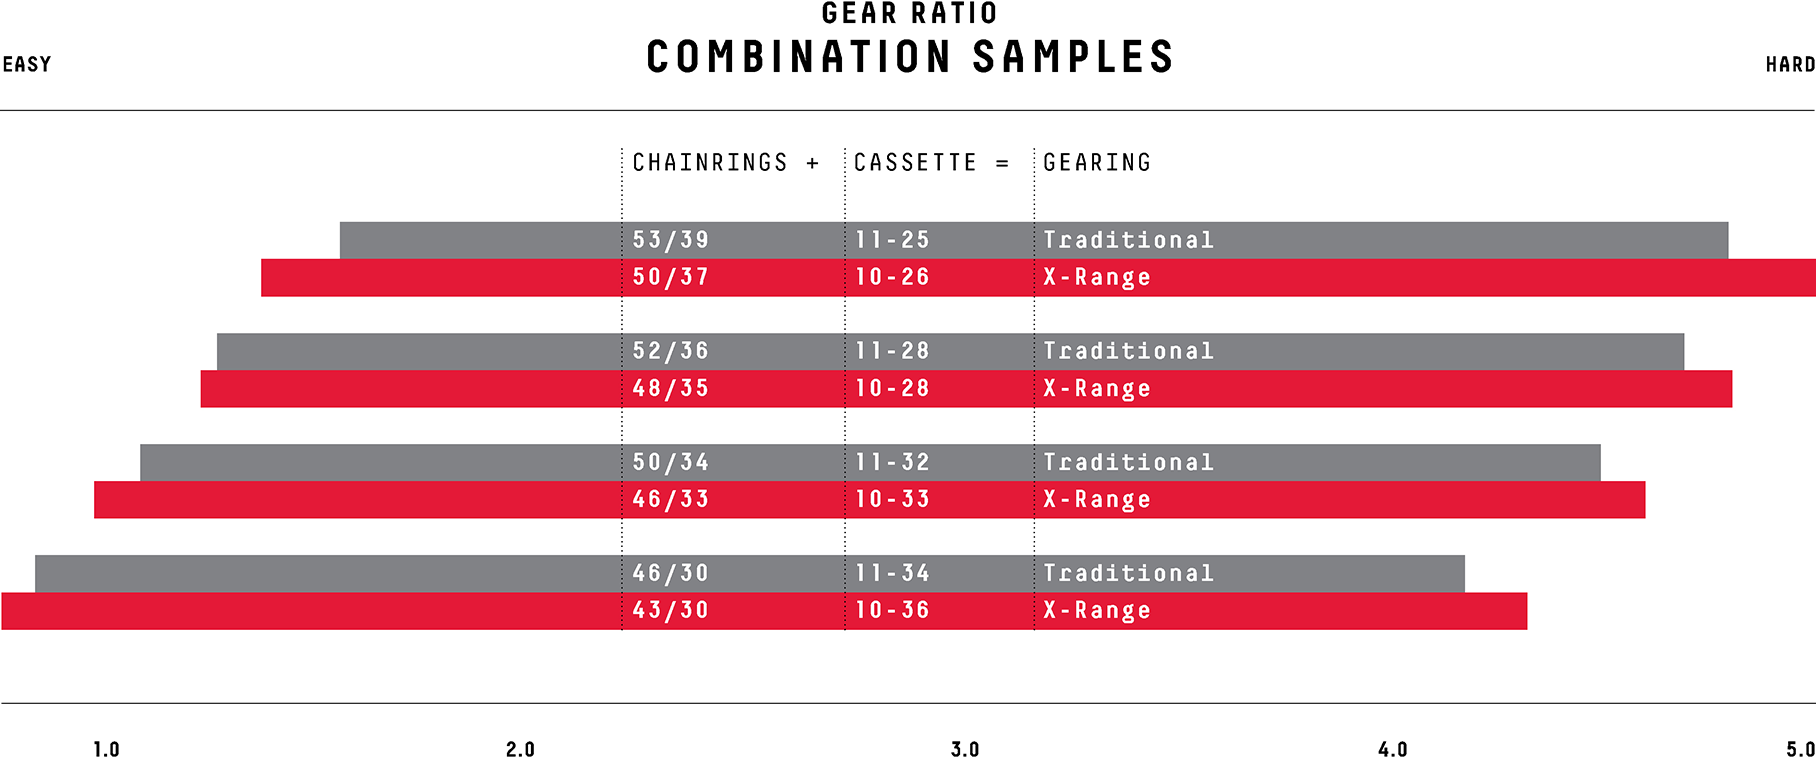 SRAM AXS 12 Speed Red or Force Reliability - Poll - Page 4 - Weight Weenies